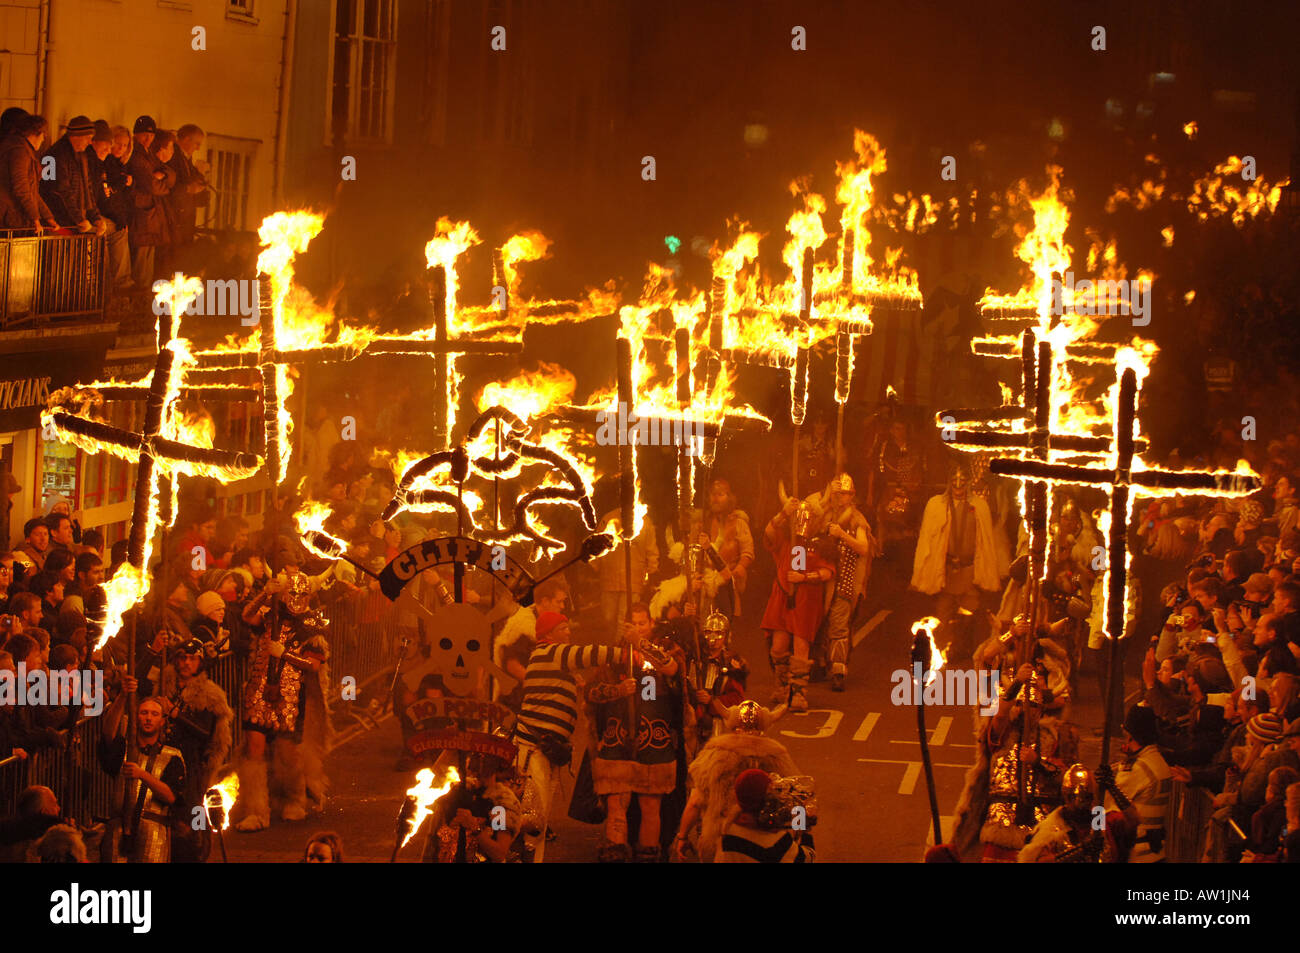 Burning crosses form part of a breathtaking parade of fire and fireworks on bonfire  night in Lewes, Sussex, England Stock Photo